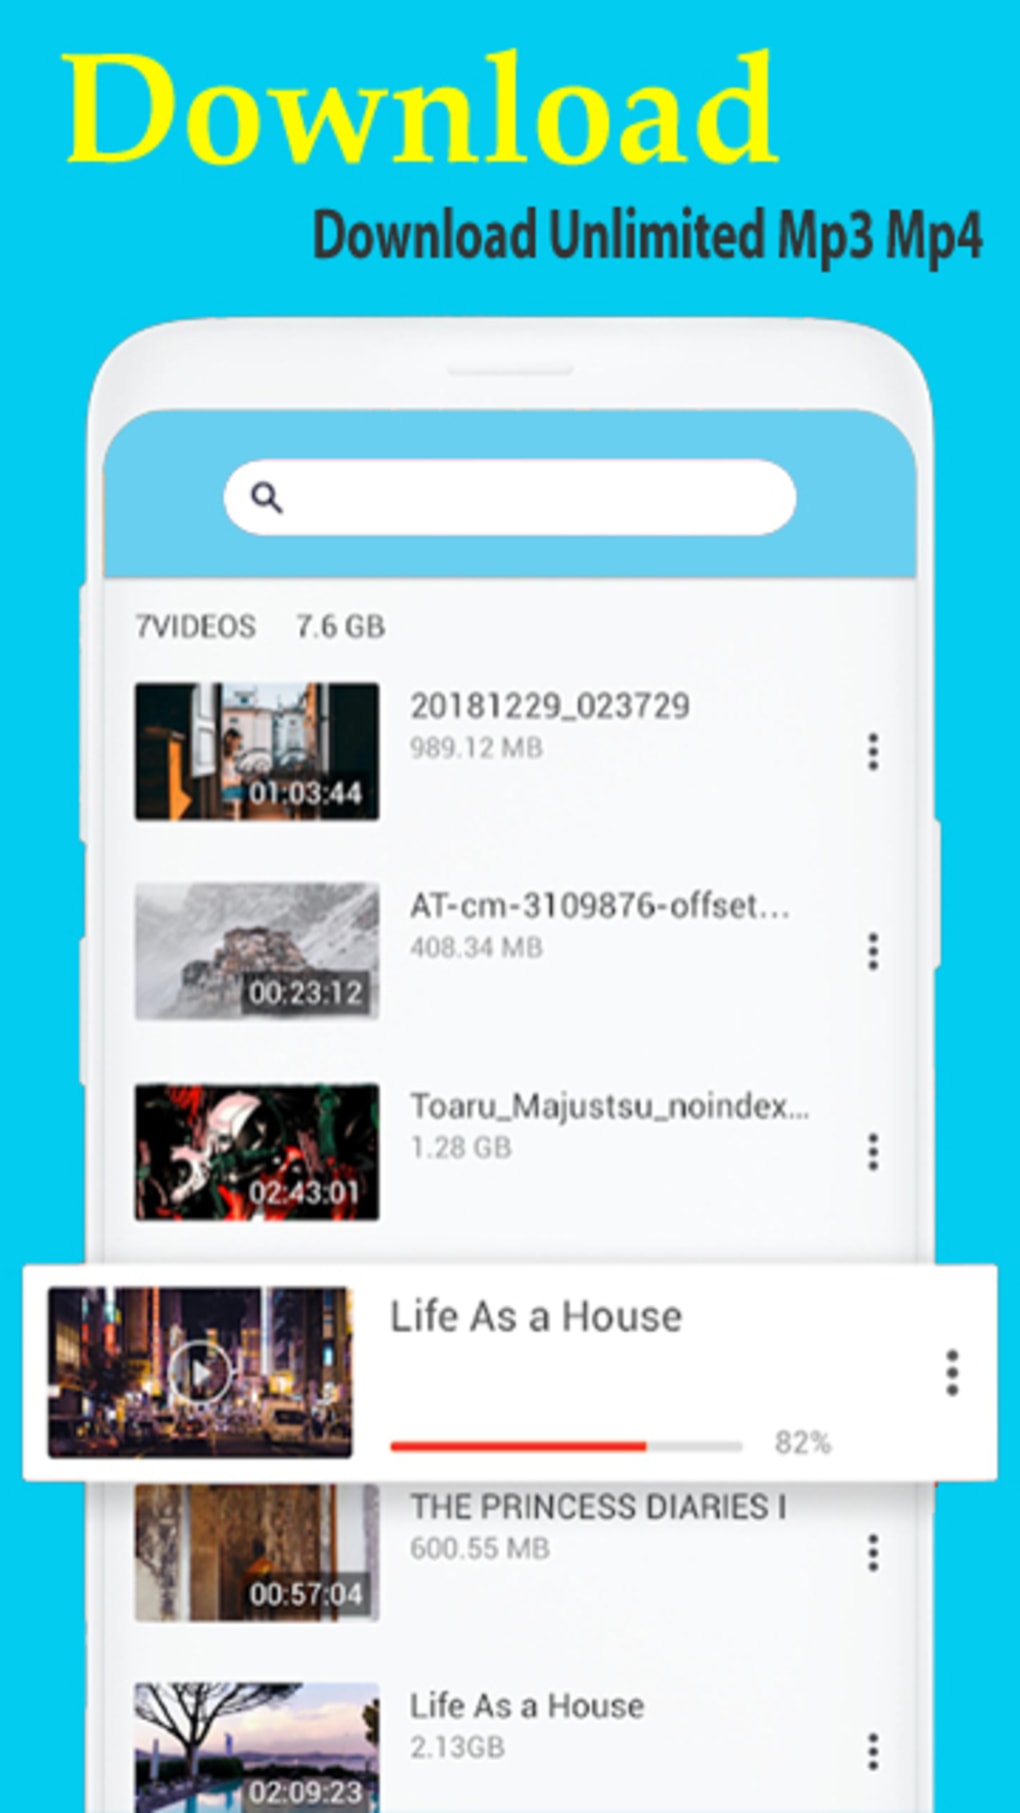 Tubidy Mp3 Music Downloader for - Download